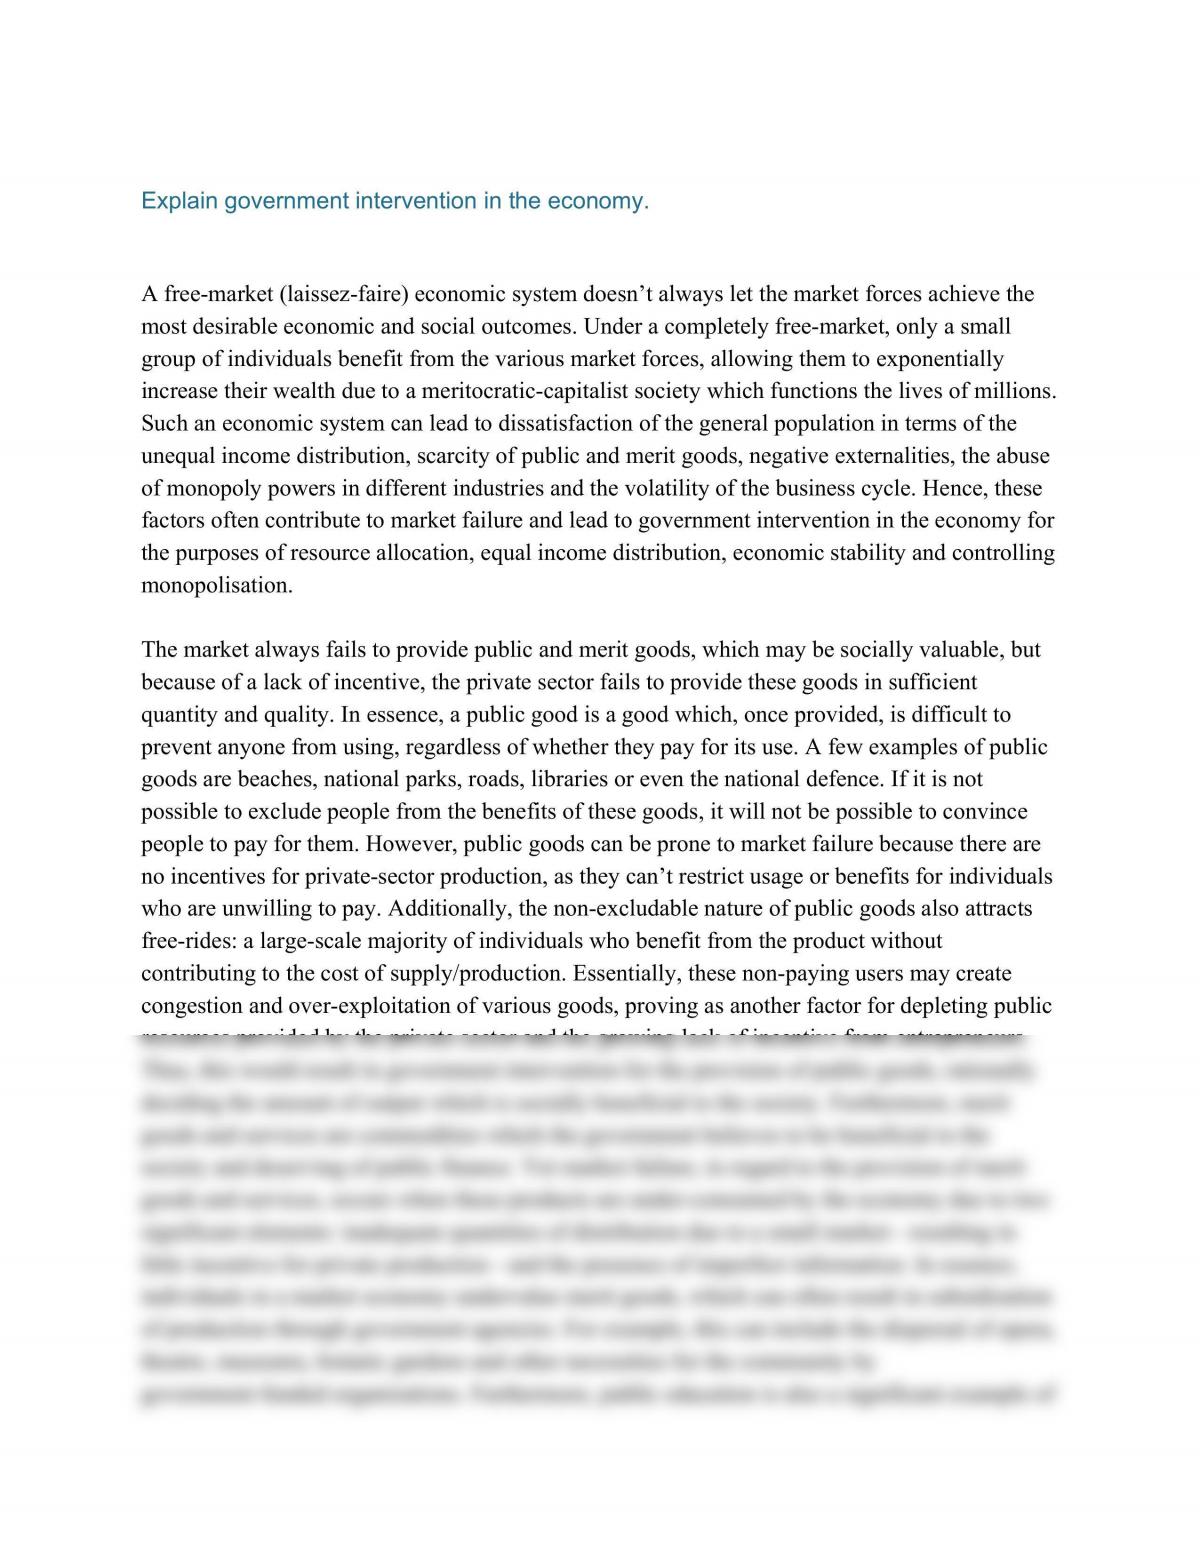 Economics Essay on Government Intervention in the Economy - Page 1